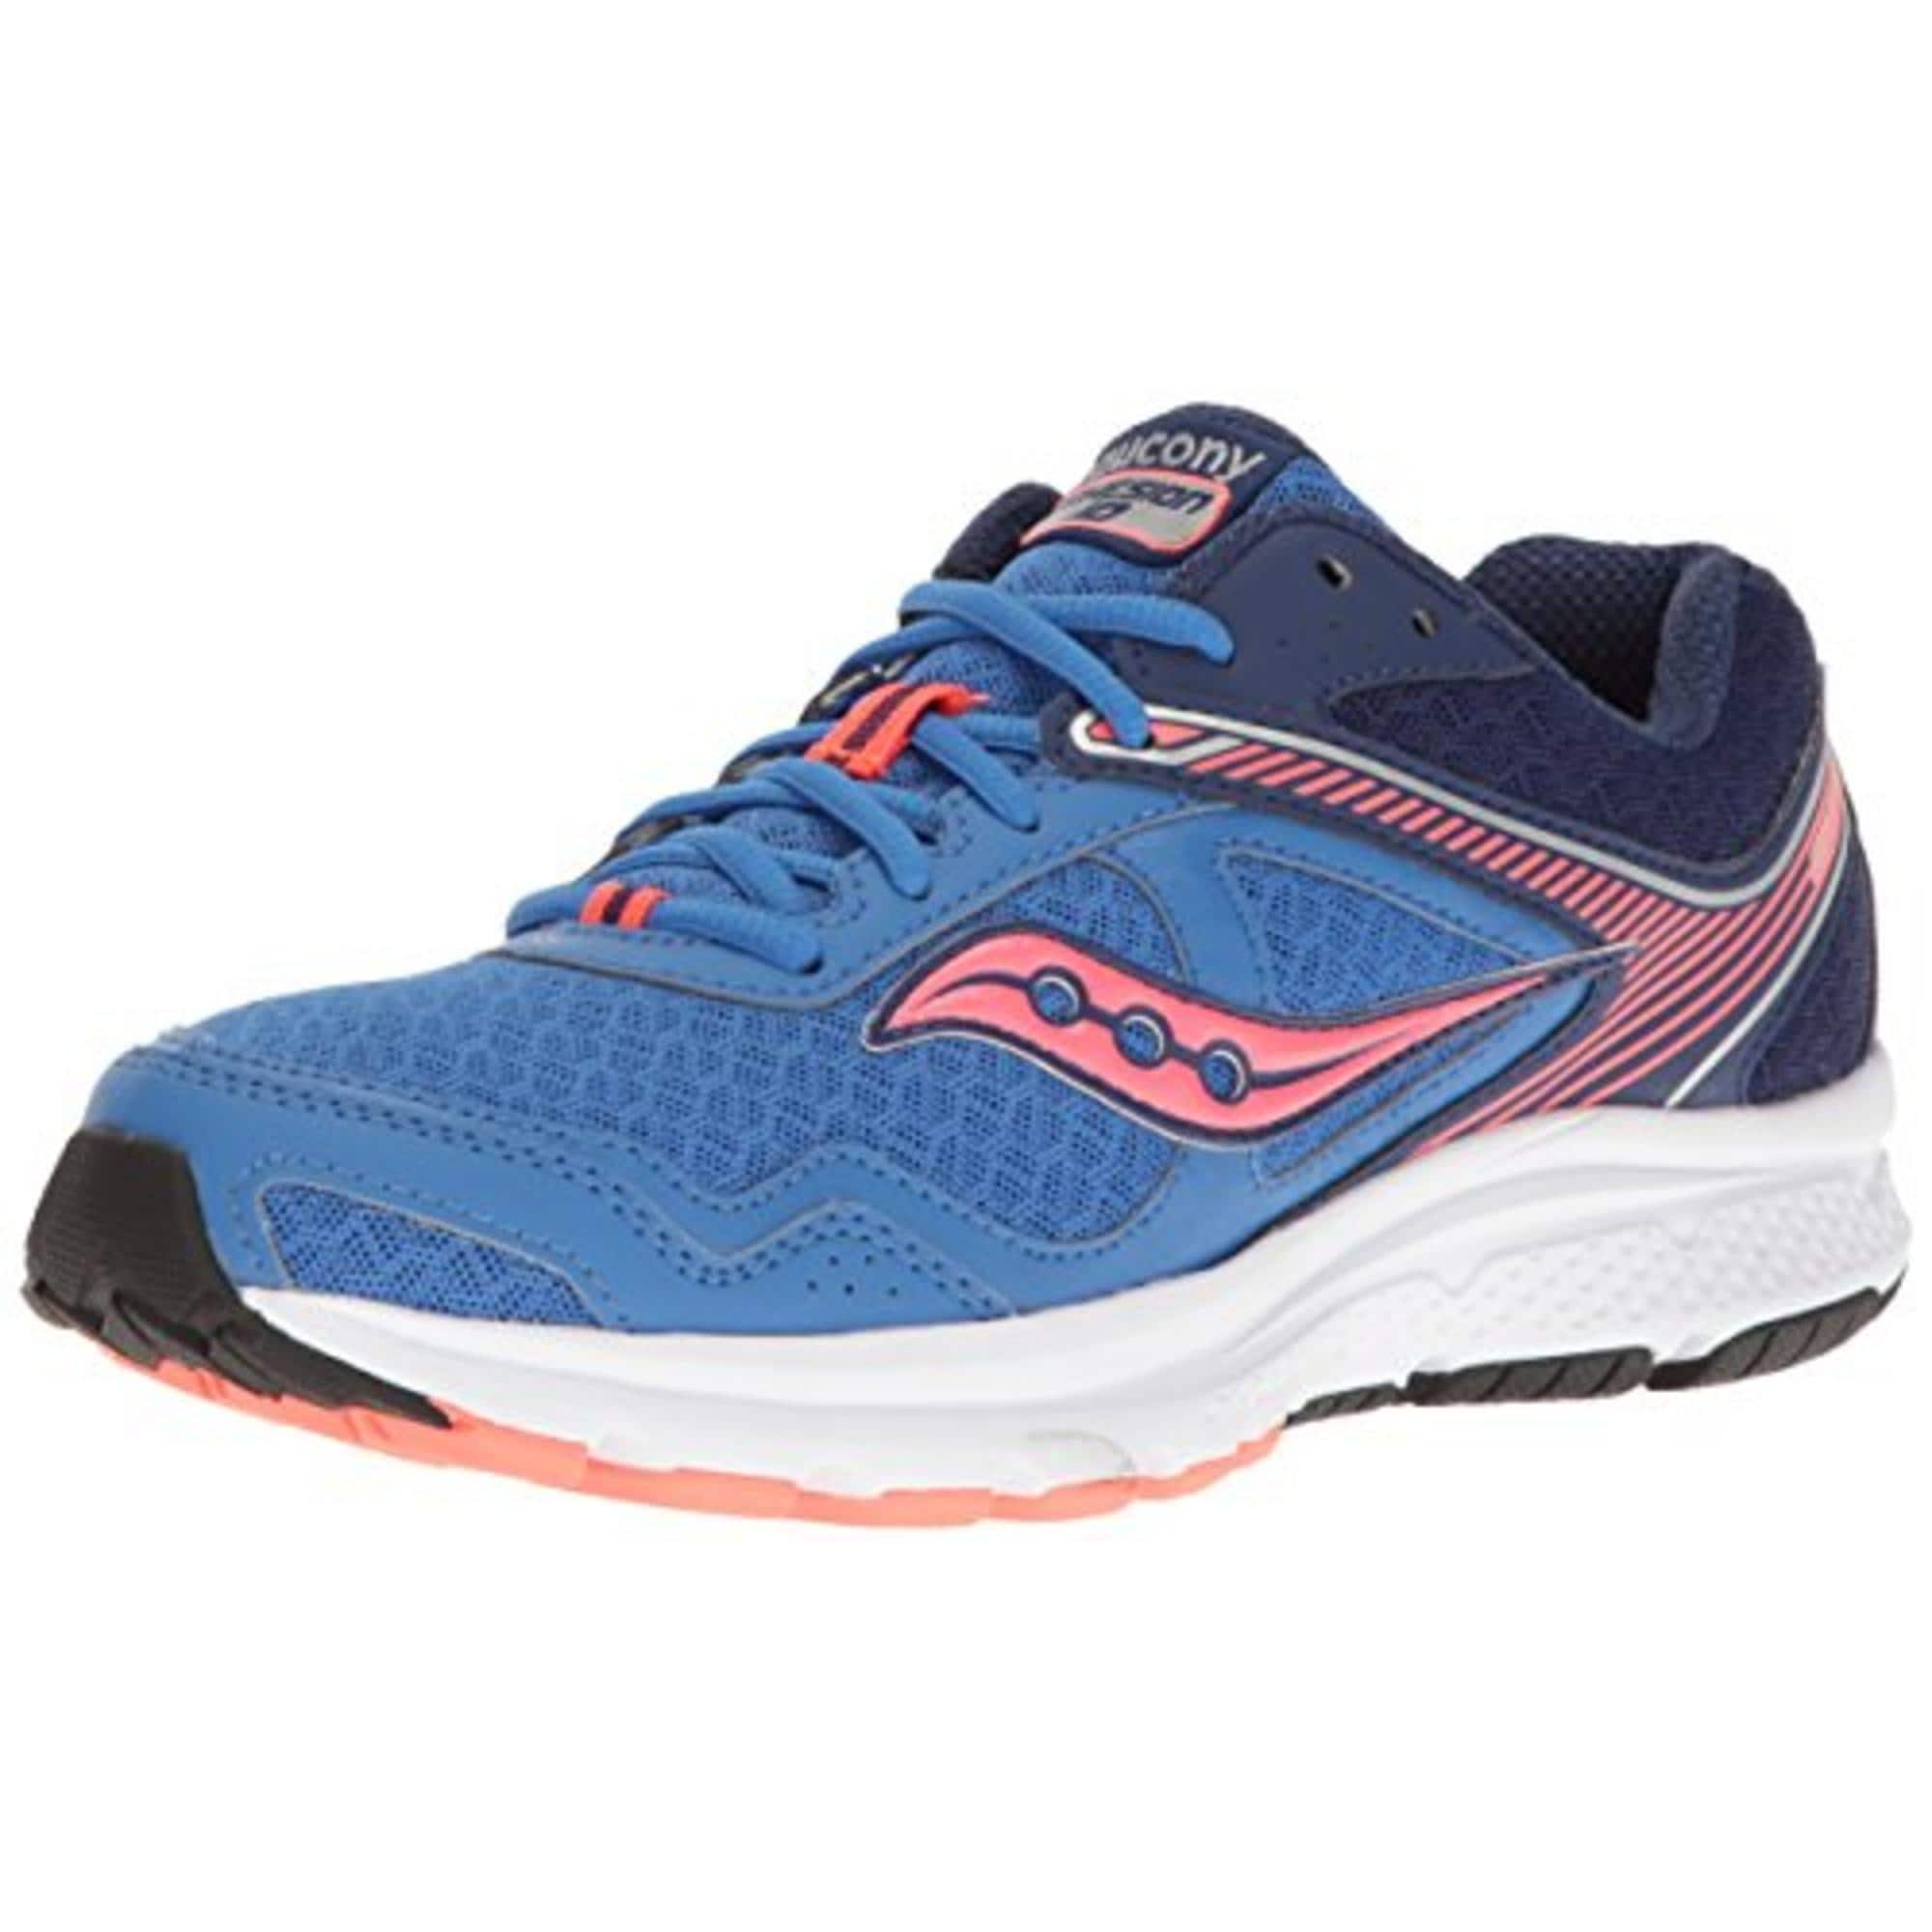 saucony grid cohesion 10 road running shoe